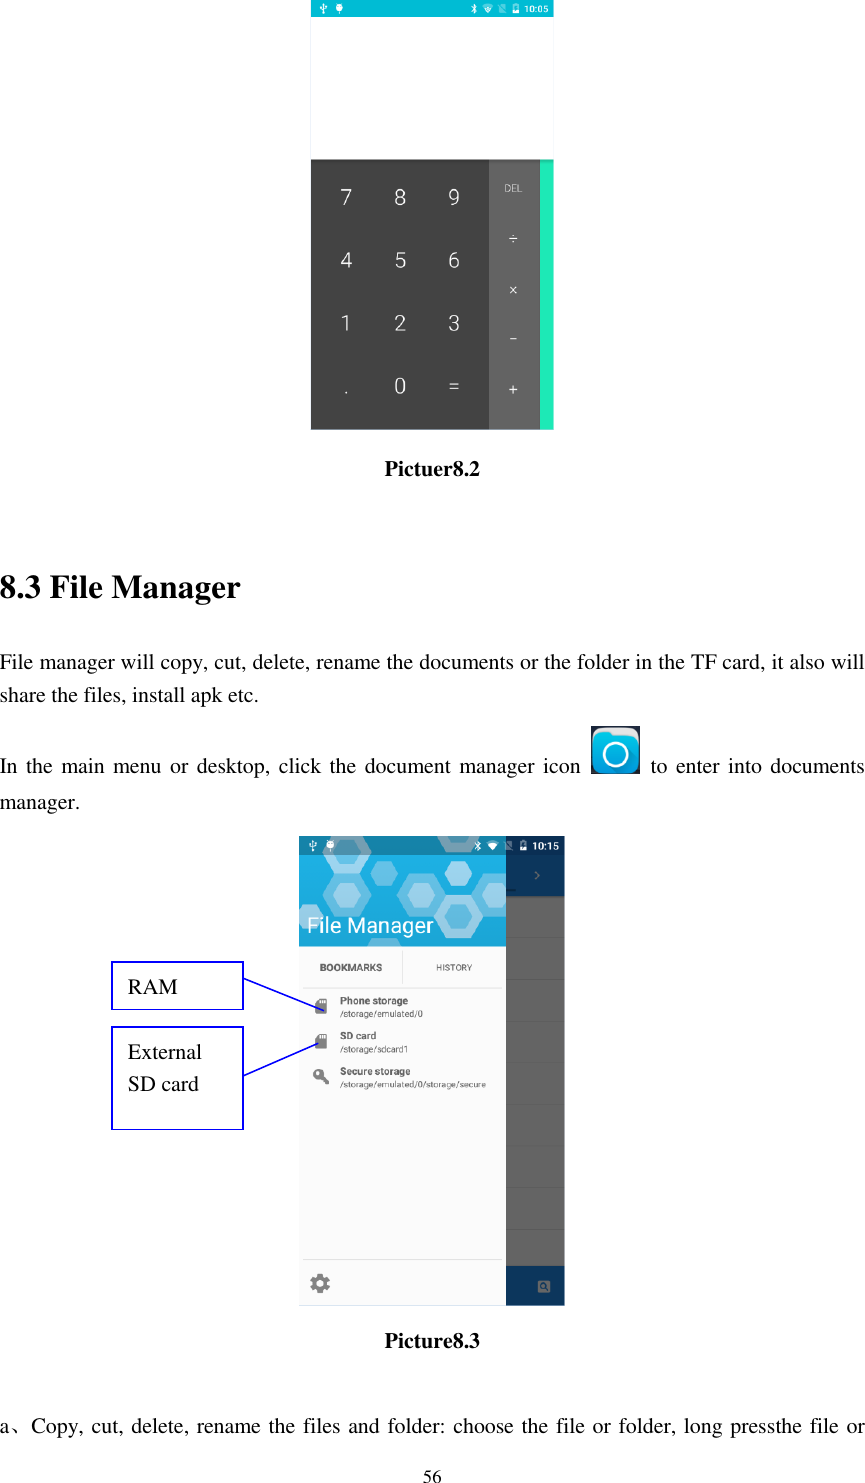      56  Pictuer8.2  8.3 File Manager File manager will copy, cut, delete, rename the documents or the folder in the TF card, it also will share the files, install apk etc. In the main menu or  desktop, click the document manager icon    to enter into documents manager.  Picture8.3  a、Copy, cut, delete, rename the files and folder: choose the file or folder, long pressthe file or RAM  External SD card 